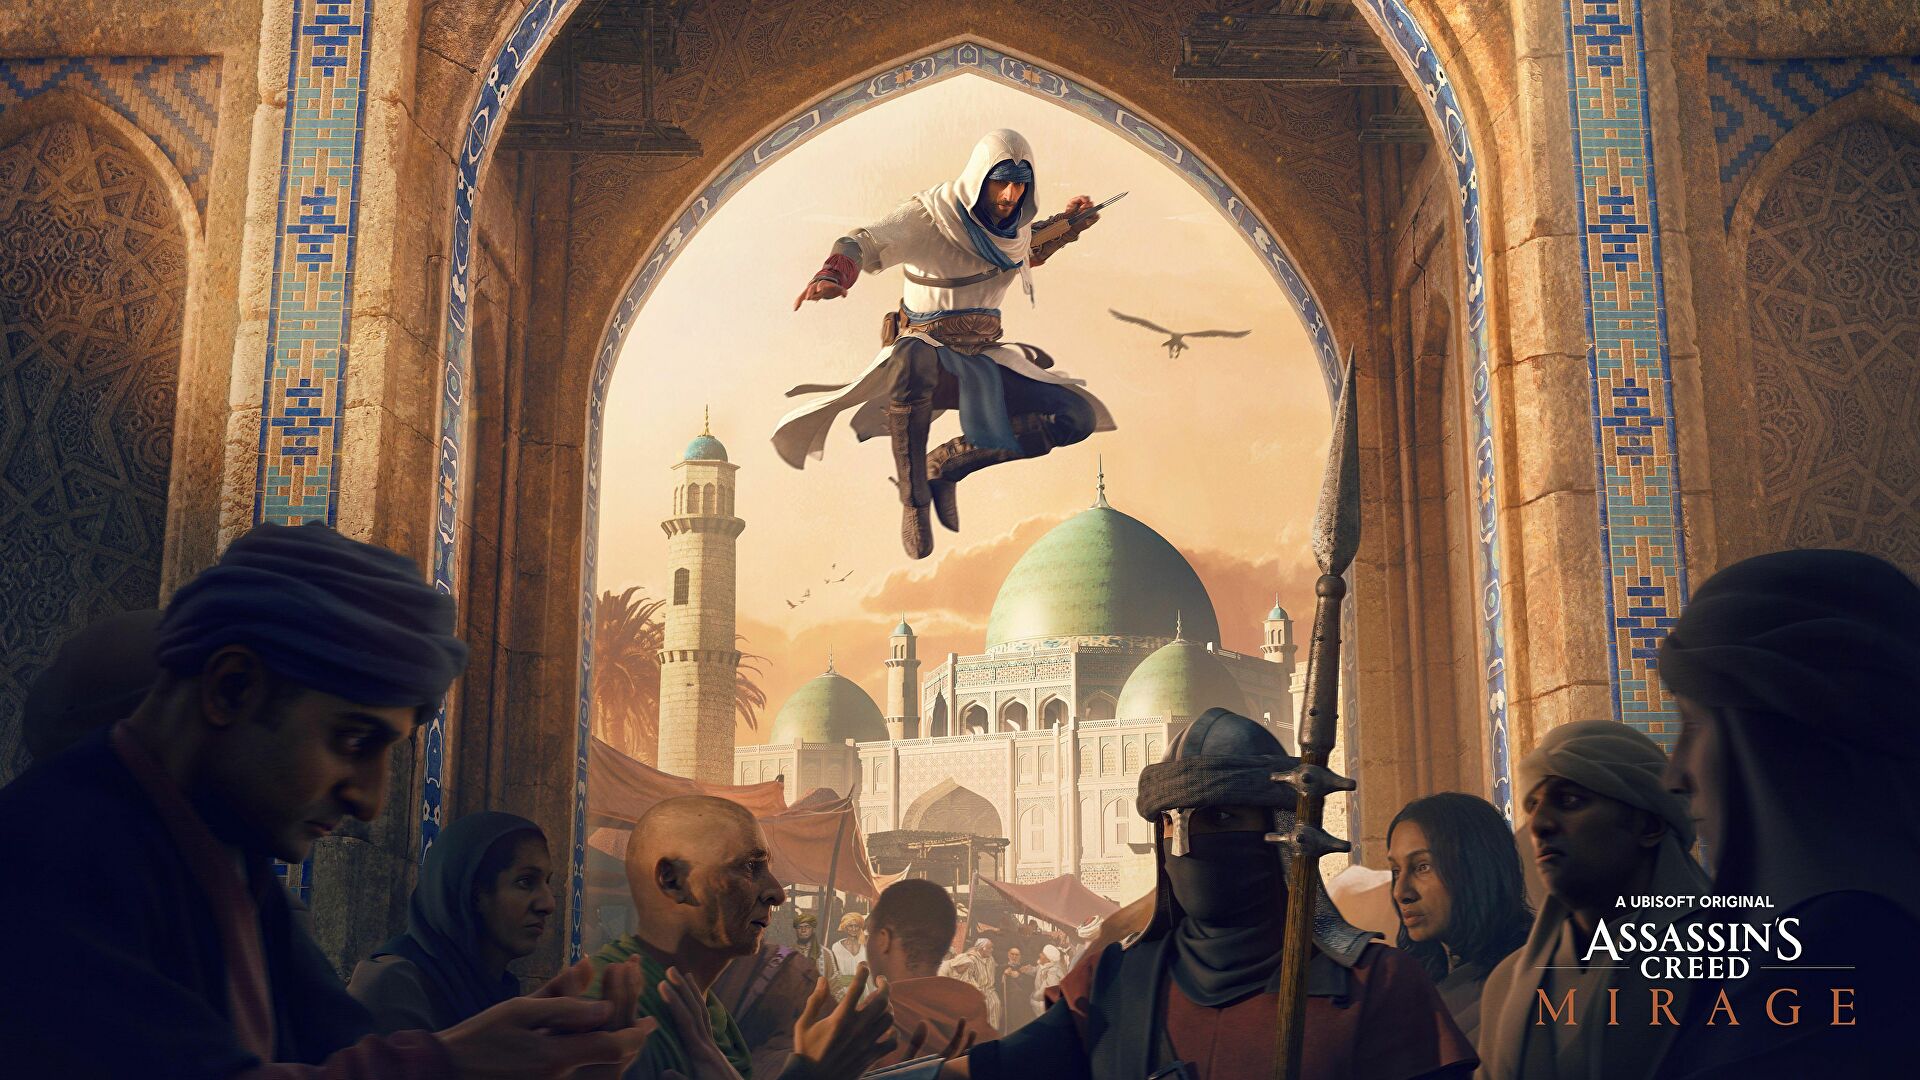 Ubisoft promises Assassin’s Creed Mirage won’t have “real gambling” in the game